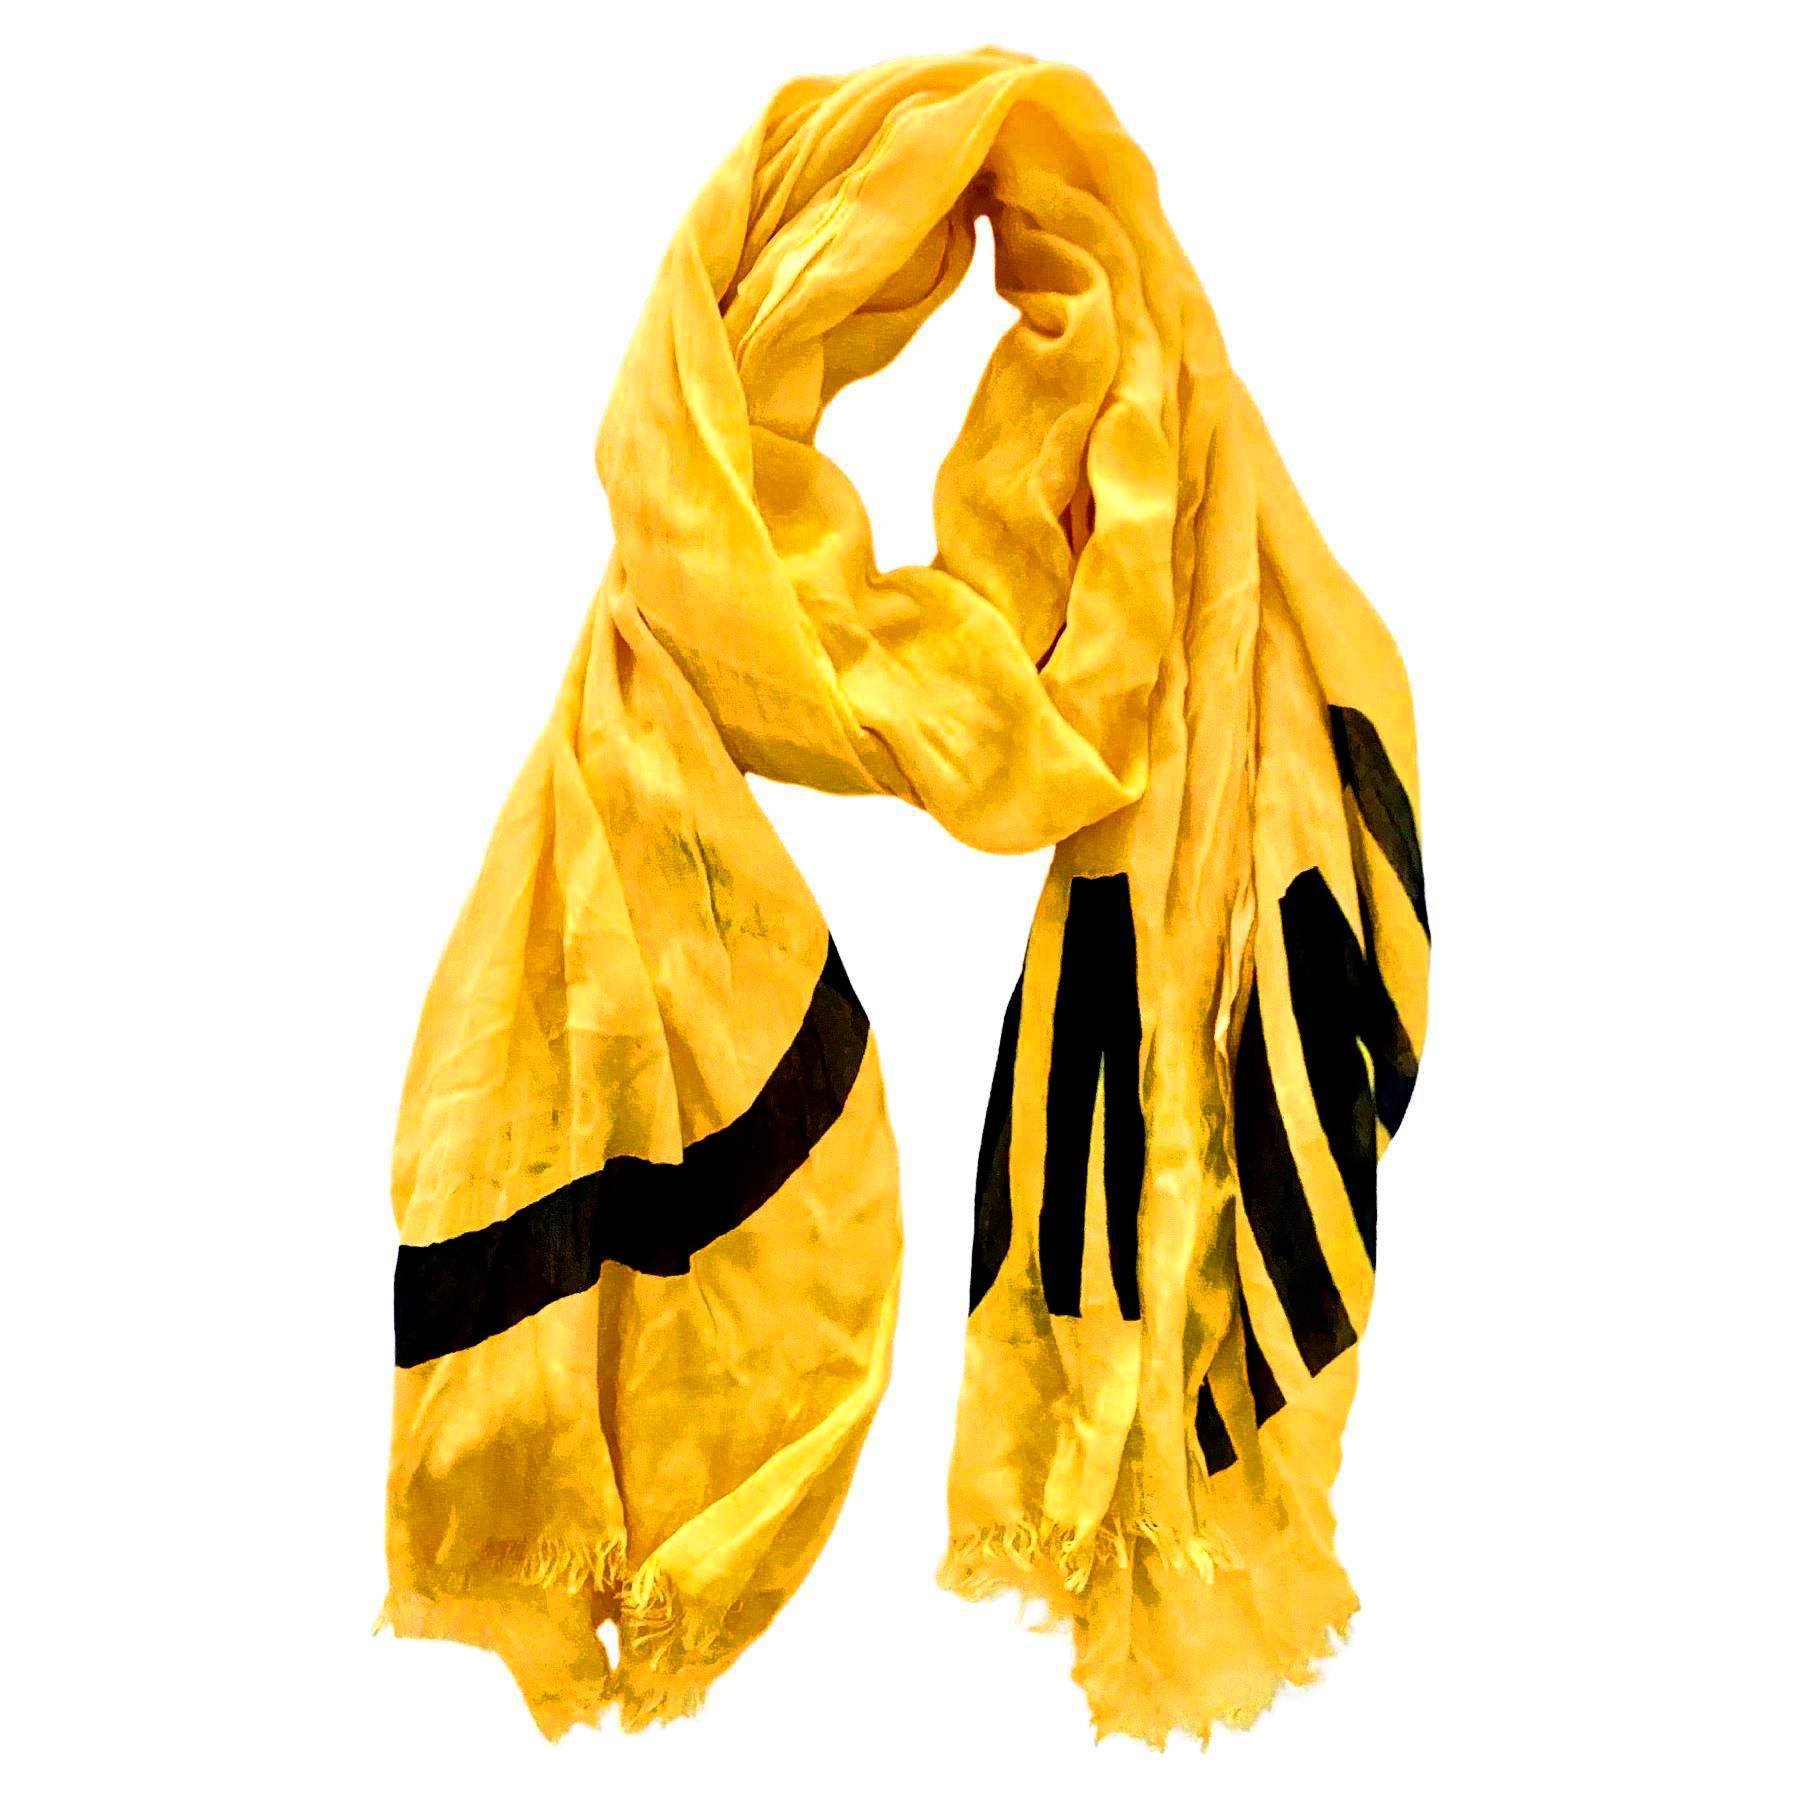 Moschino Yellow smile acid face in yellow soft cotton, Made in Italy  This luxurious scarf is crafted with extreme attention to detail and quality, providing a timelessly stylish look and feel.

Condition: pre-owned, very good, light sign of wear